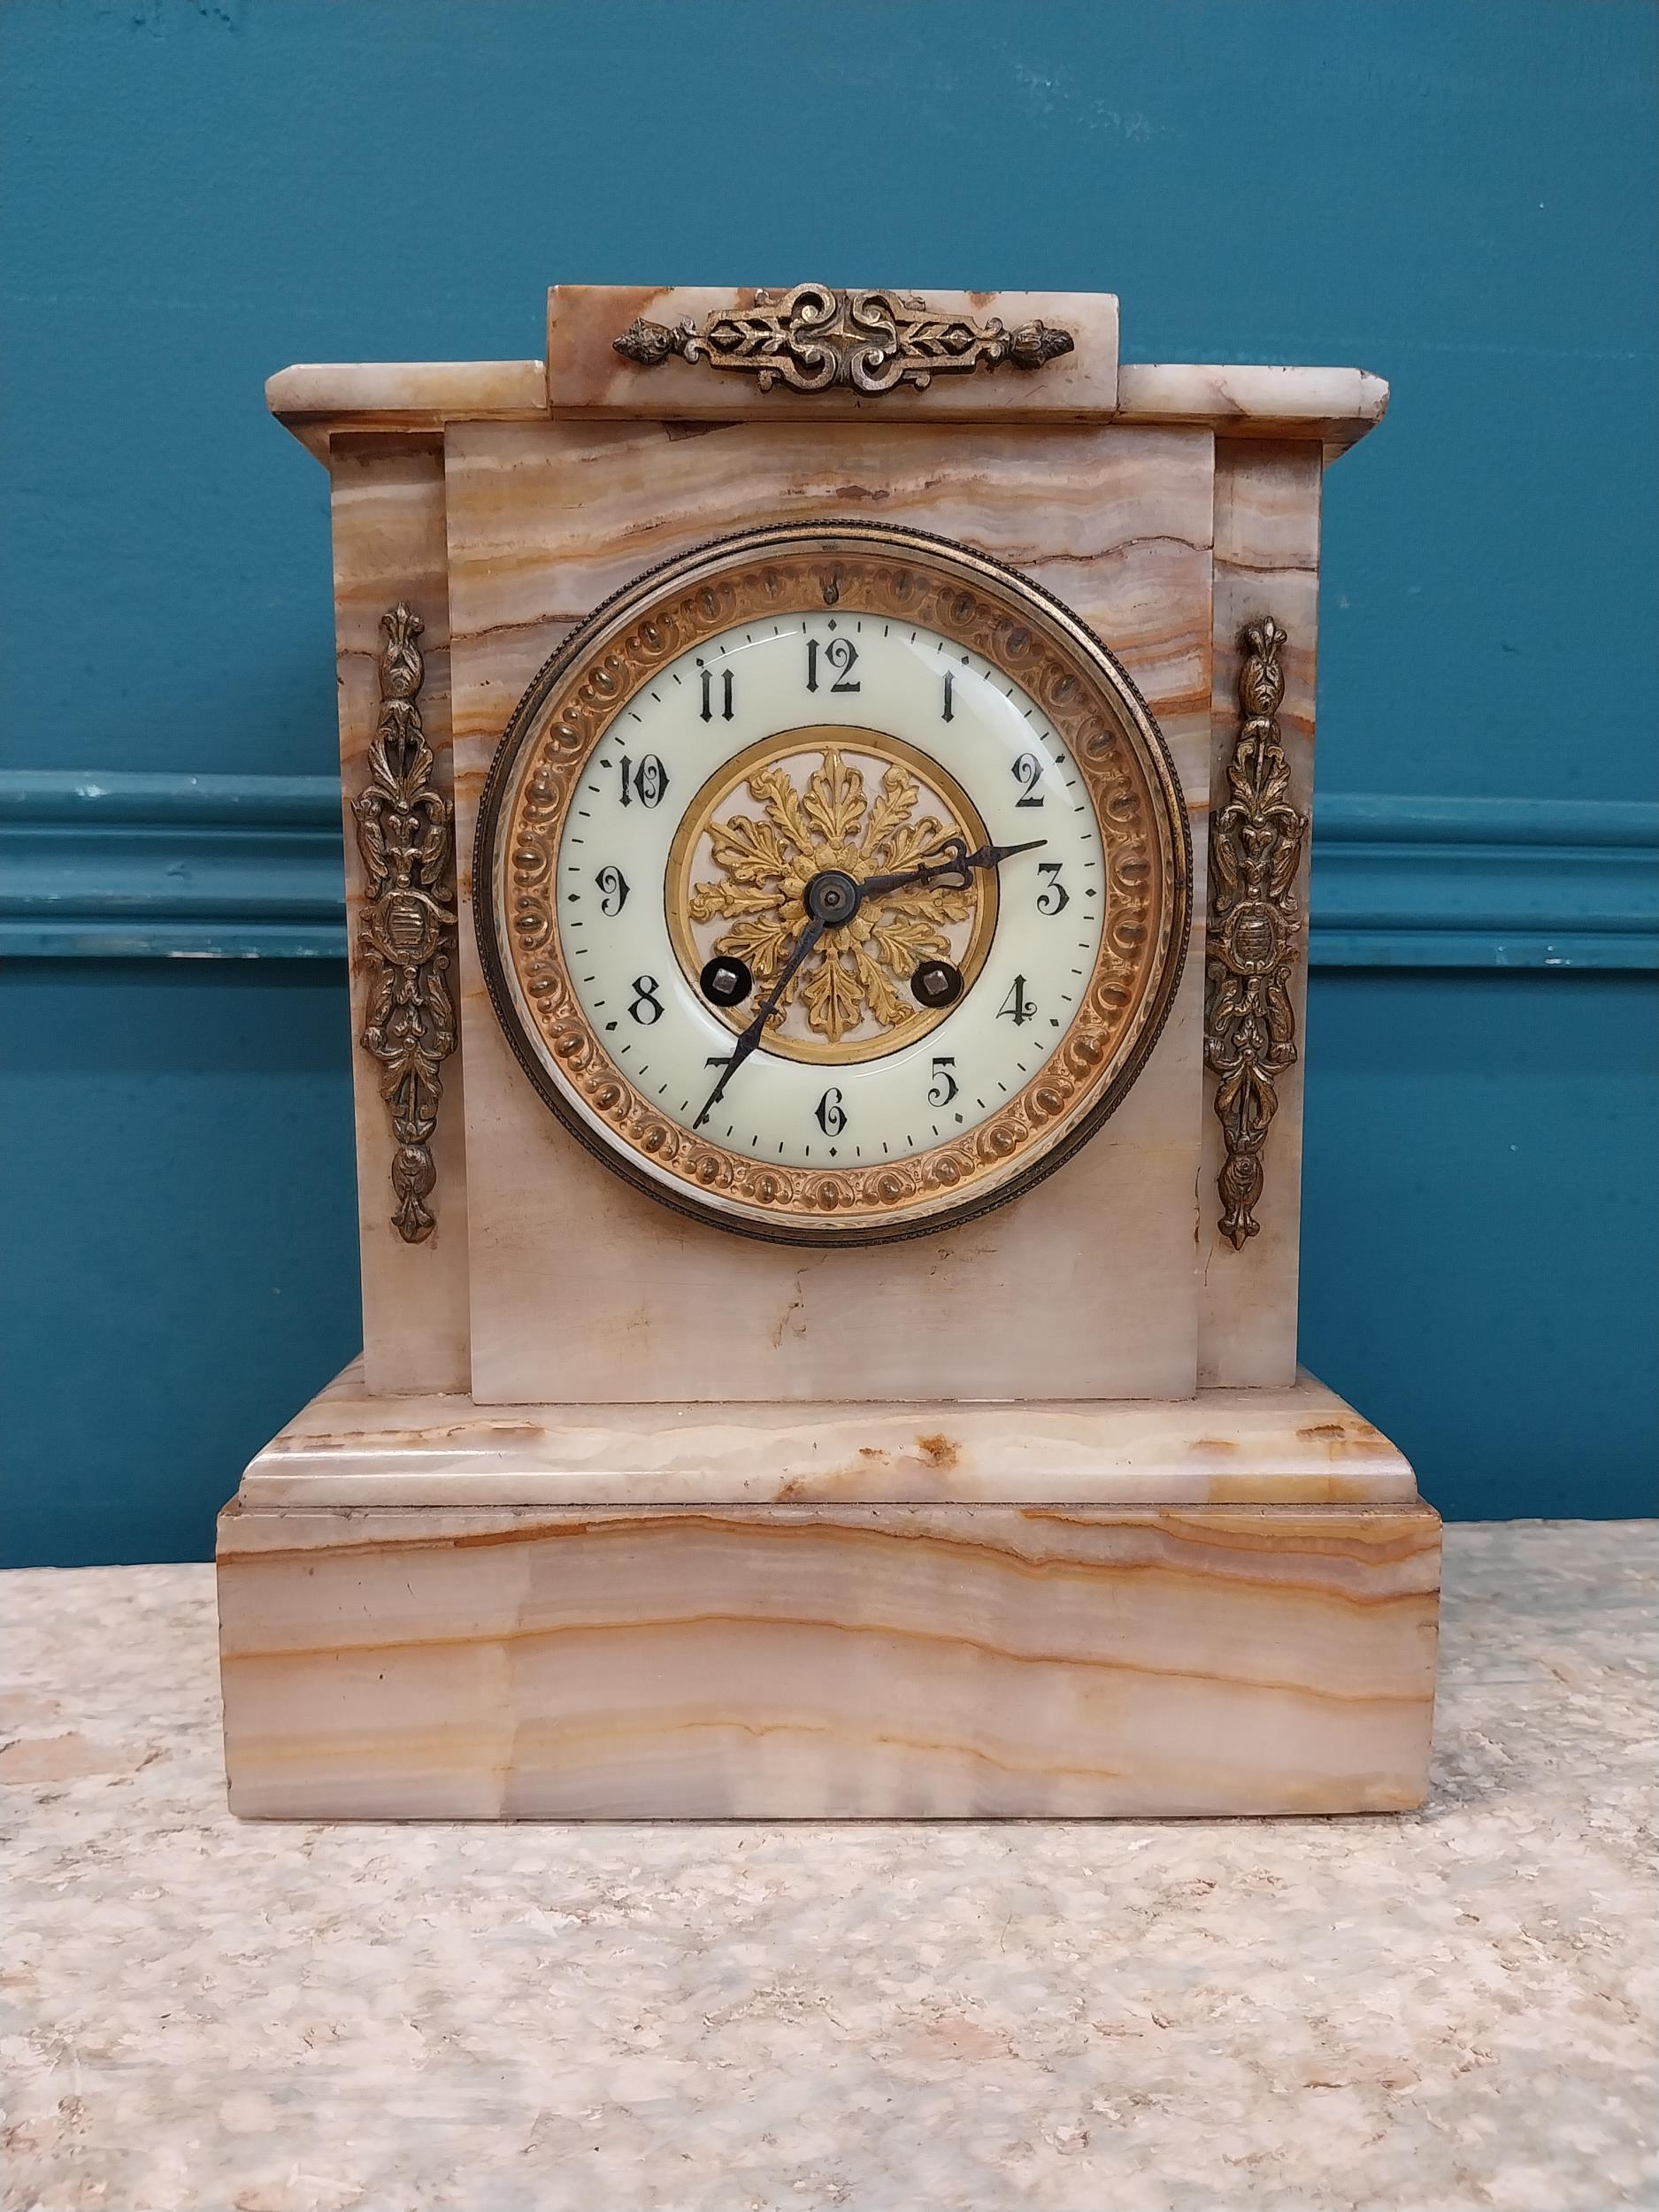 19th C. onyx mantle clock {26 cm H x 20 cm W x 12 cm D}. - Image 2 of 6